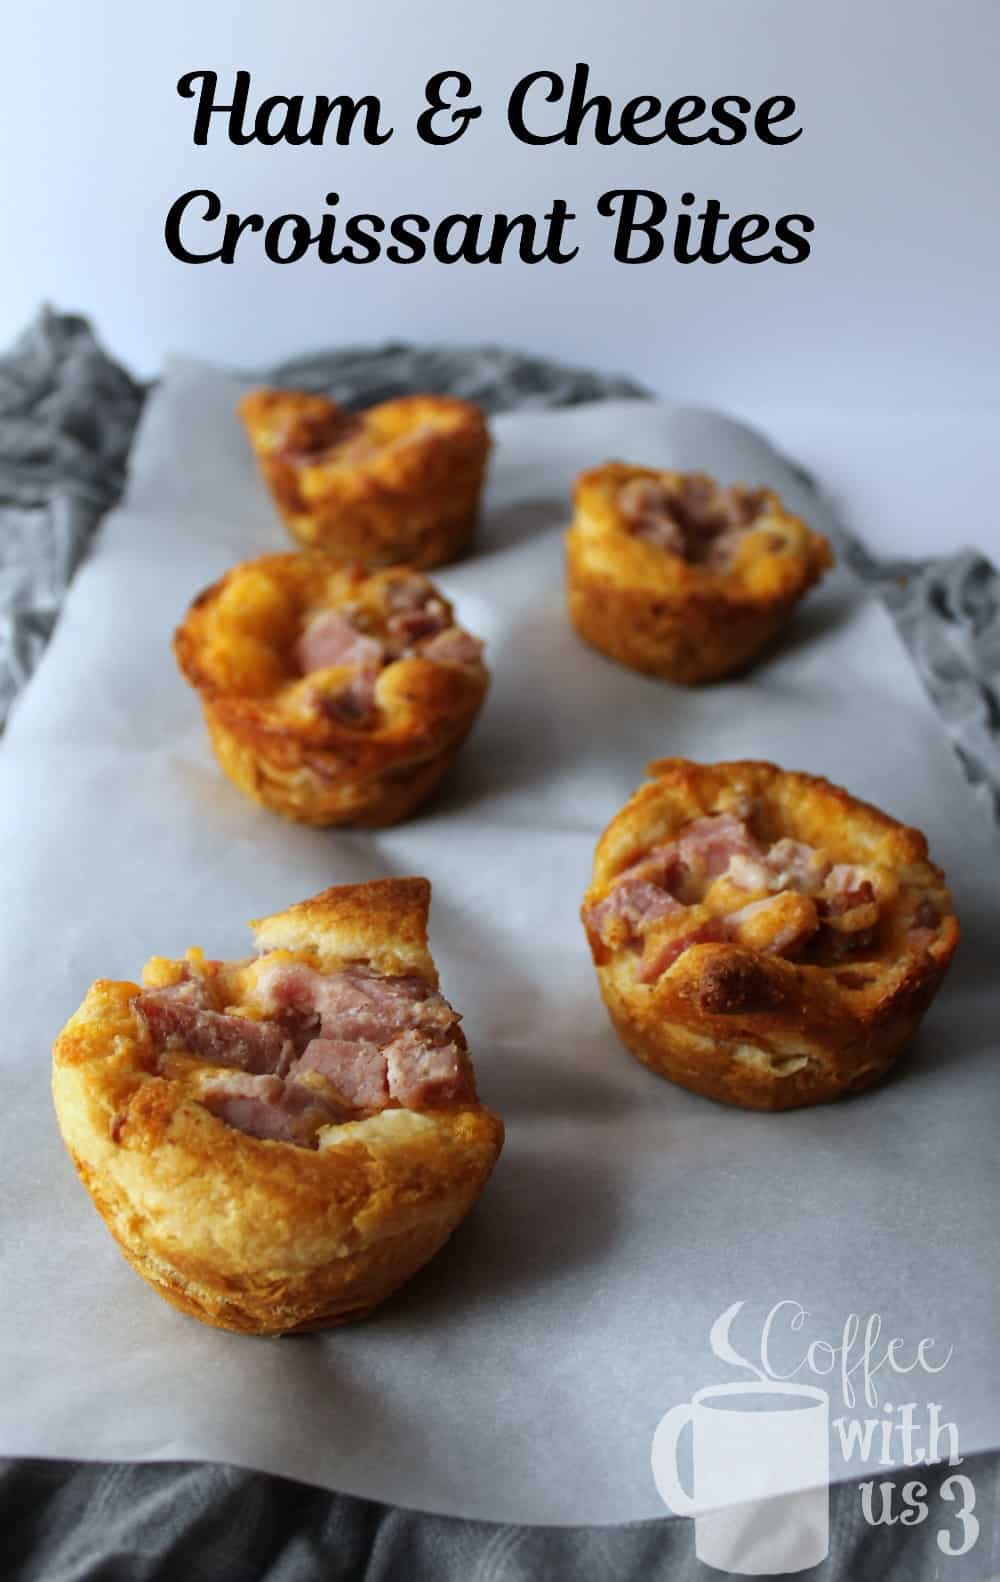 Quick and easy Ham and Cheese Croissant Bites are perfect for entertaining or on-the-go snacks.